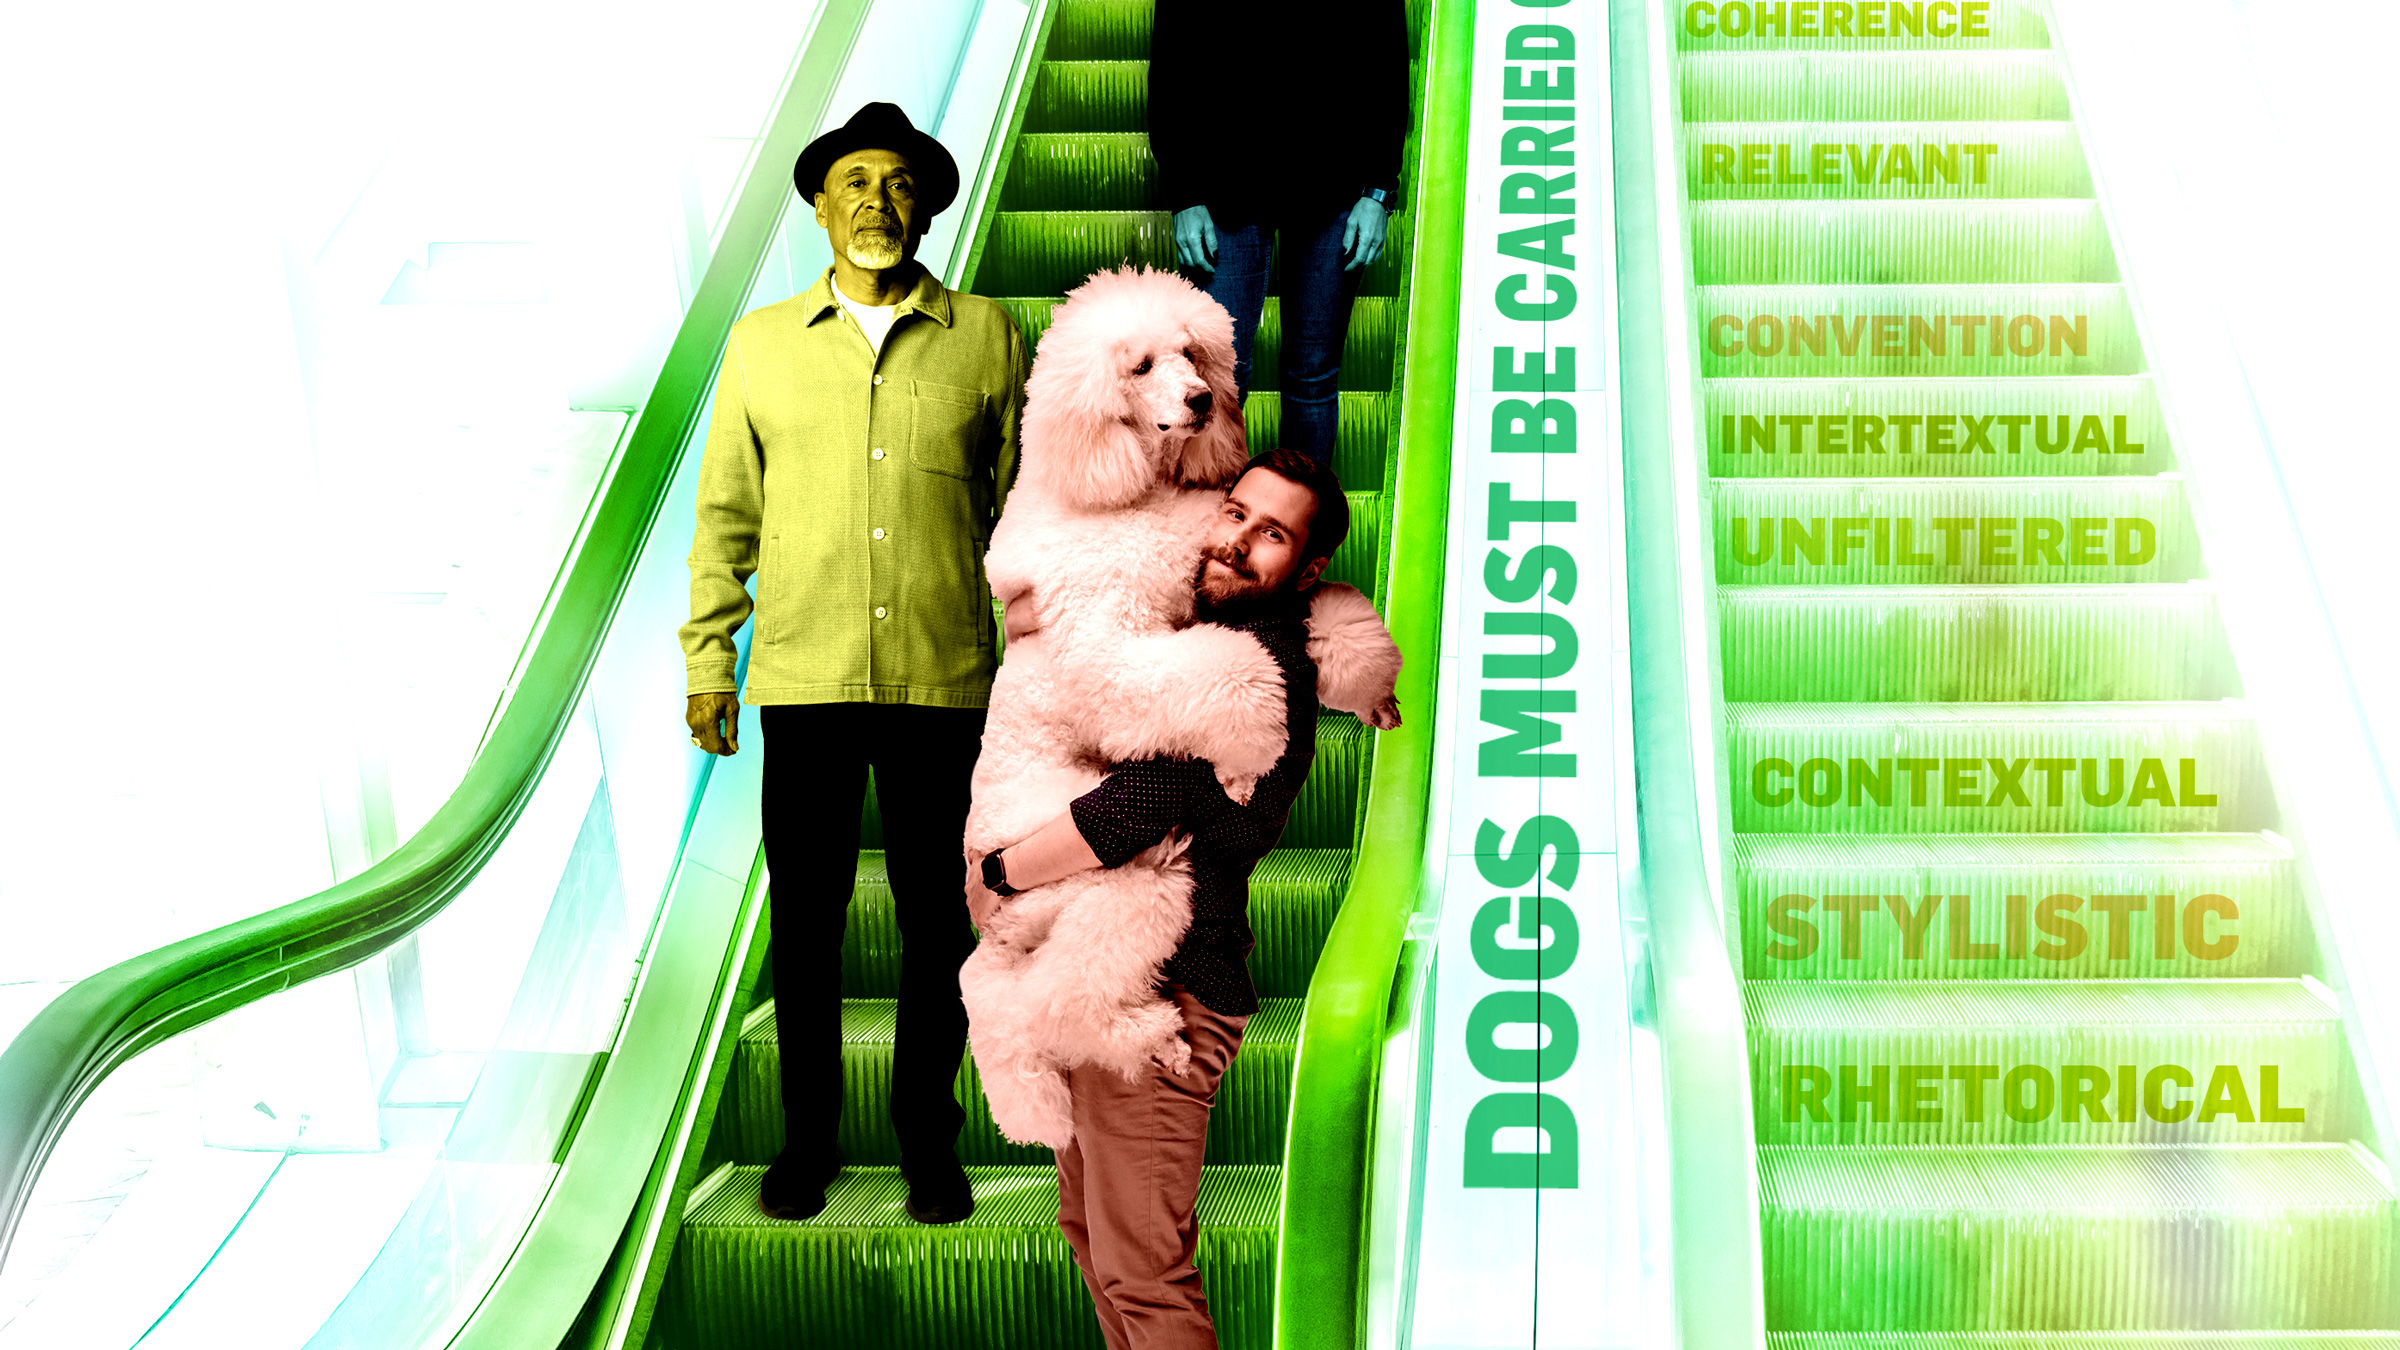 man holds a poodle while riding an escalator